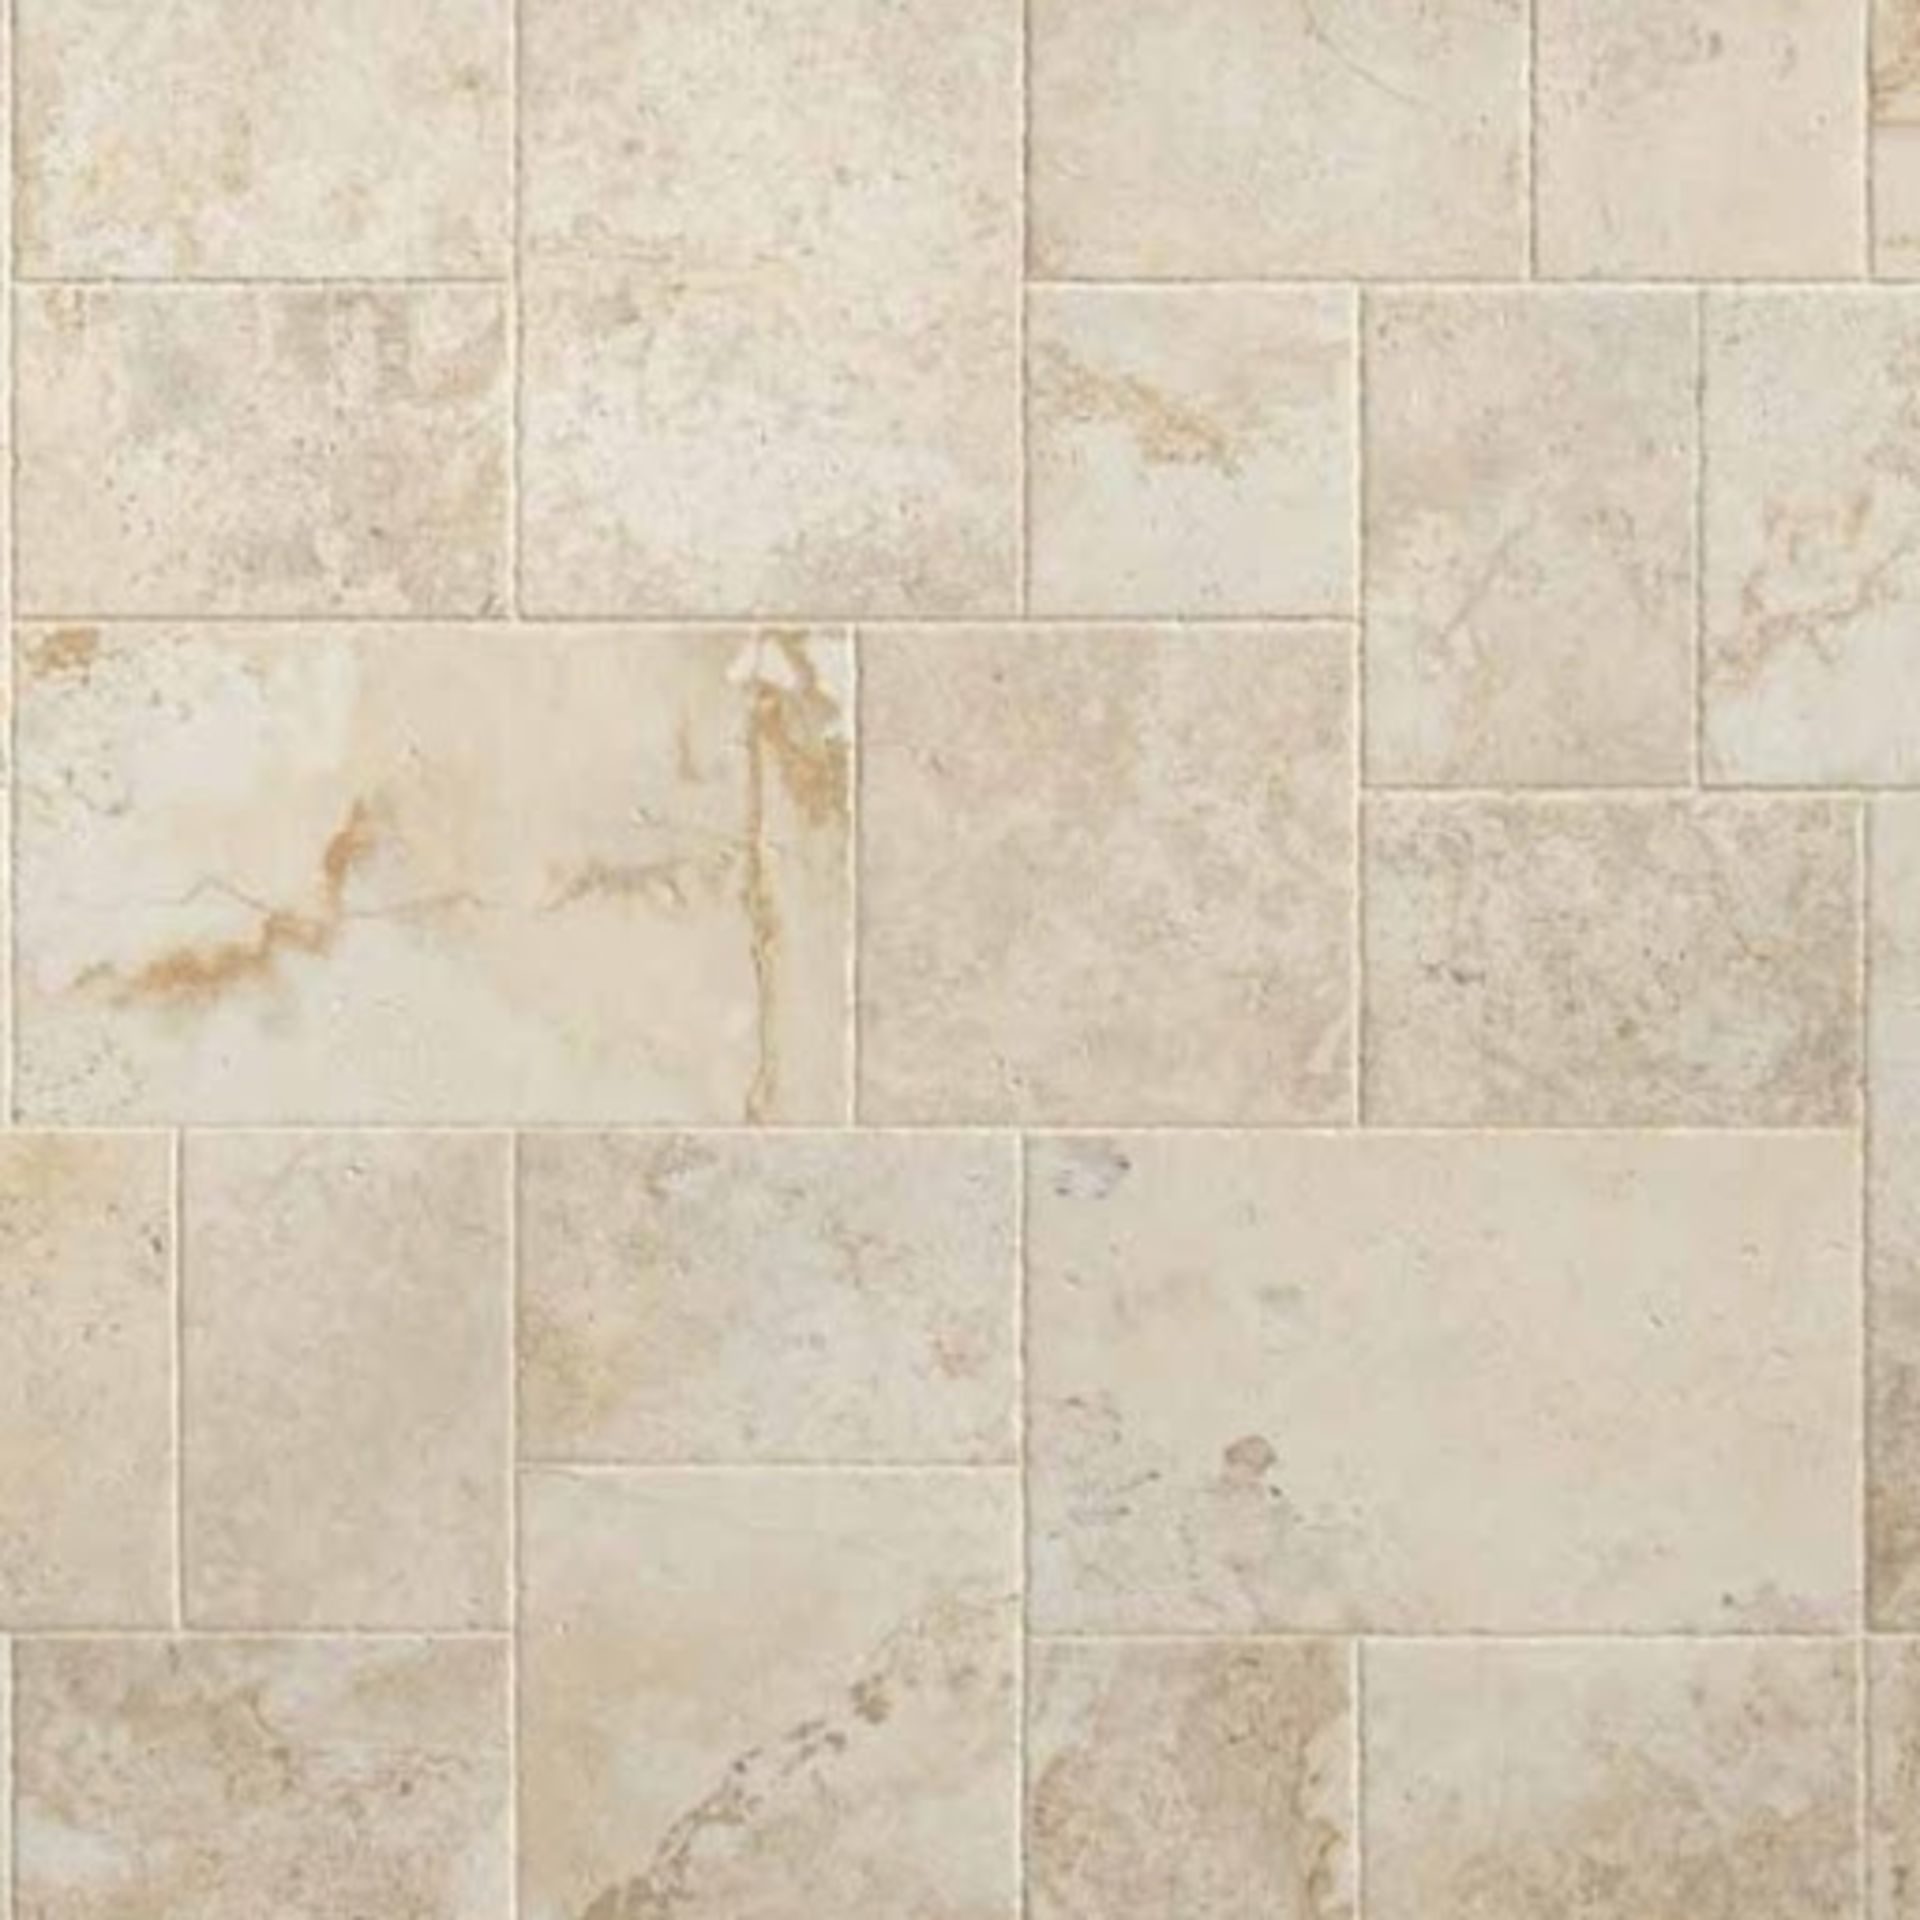 NEW 8.76 Square Meters of Imola Beige Wall and Floor Tiles. 605x605mm per tile, 10mm thick. Thi... - Image 2 of 4